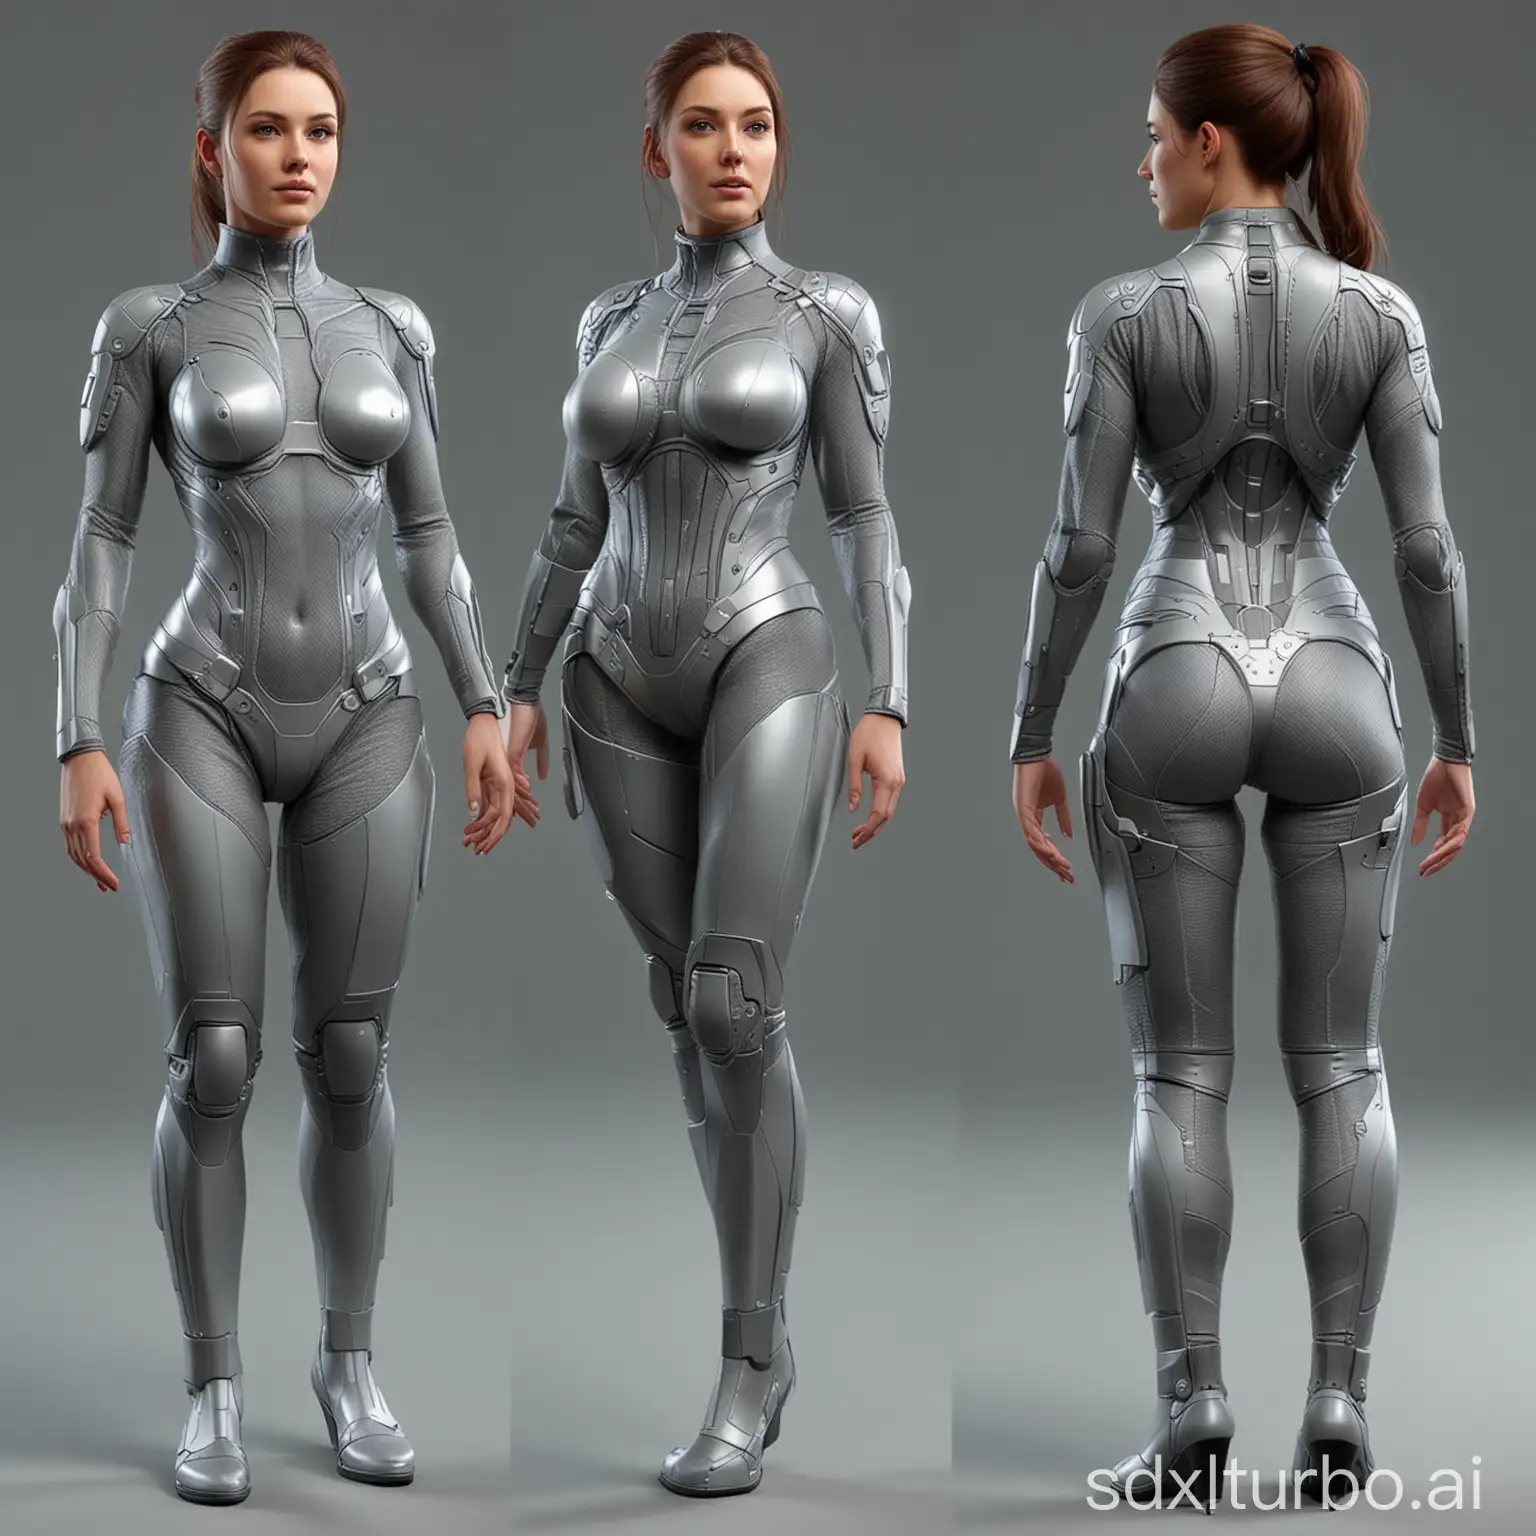 Futuristic-Realistic-Women-3D-Mesh-Modern-Full-Body-Front-and-Back-Images